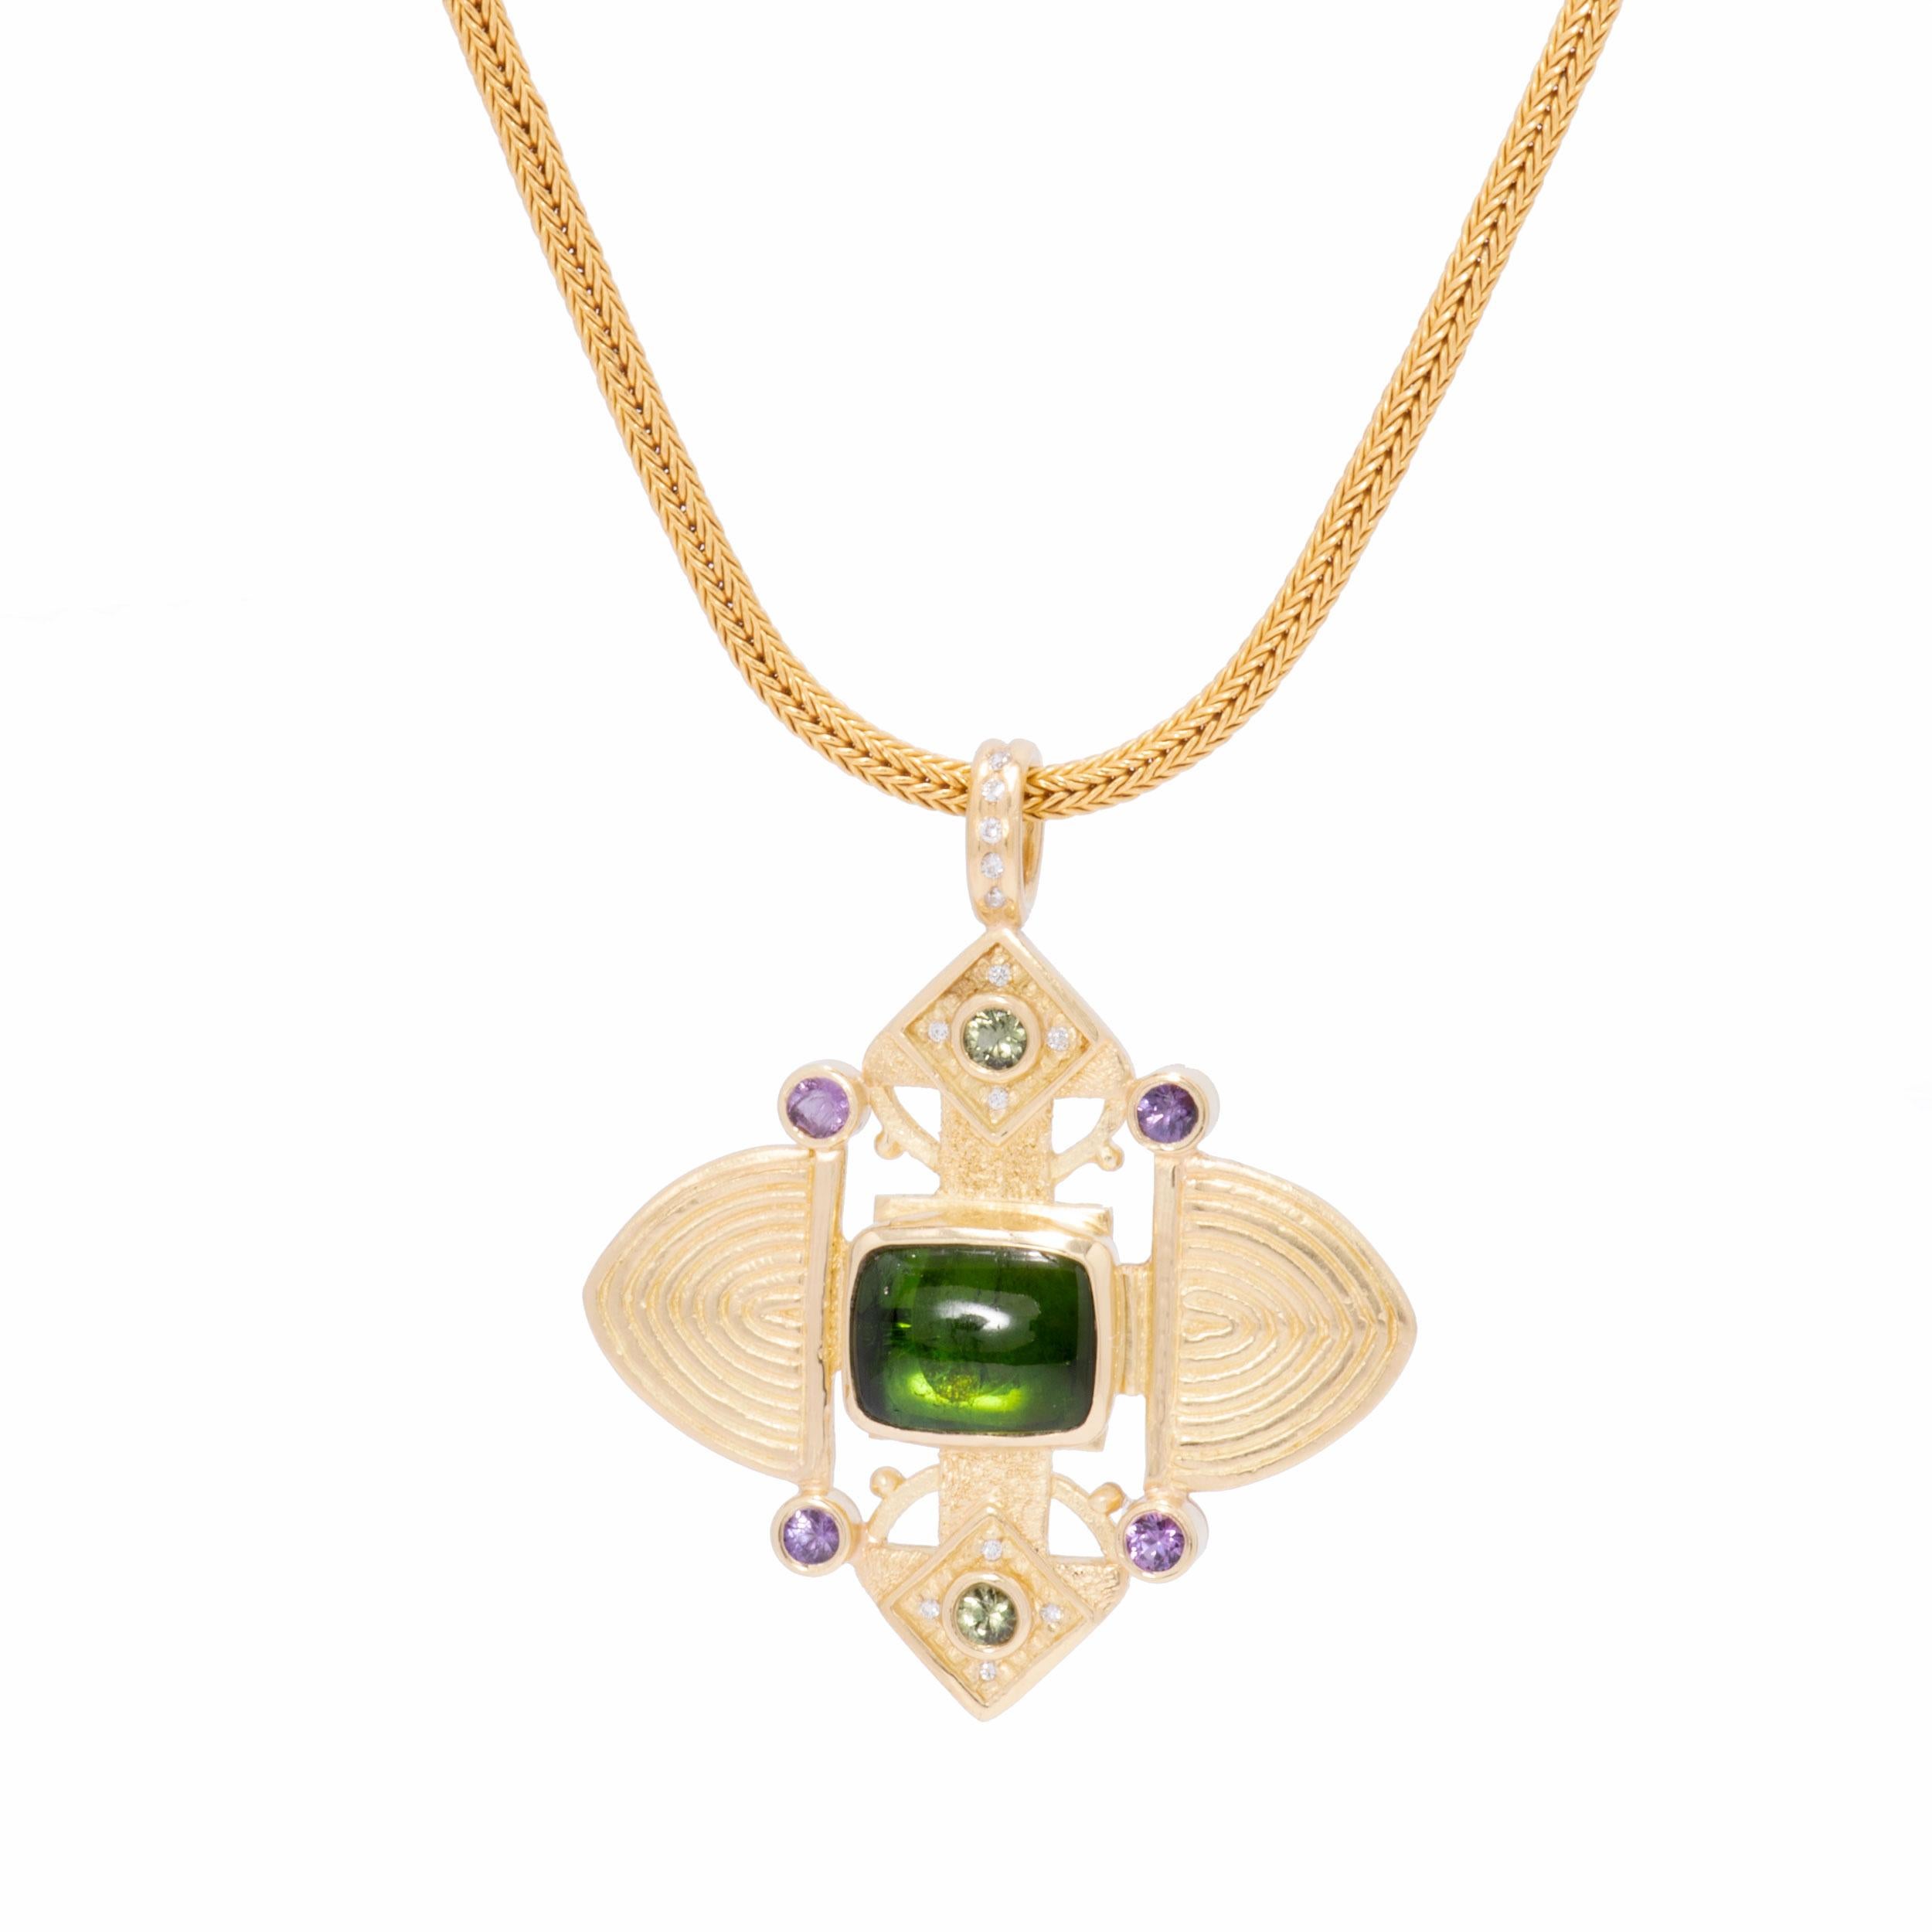 A vibrant moss green tourmaline cabochon 6.05cts is the focal point of this lavish 18k gold Ashanti Cross Pendant. Heathery purple sapphires and lettuce green sapphires .78ctw. harmonize to provide a finely balanced treasure. White diamonds .14ctw